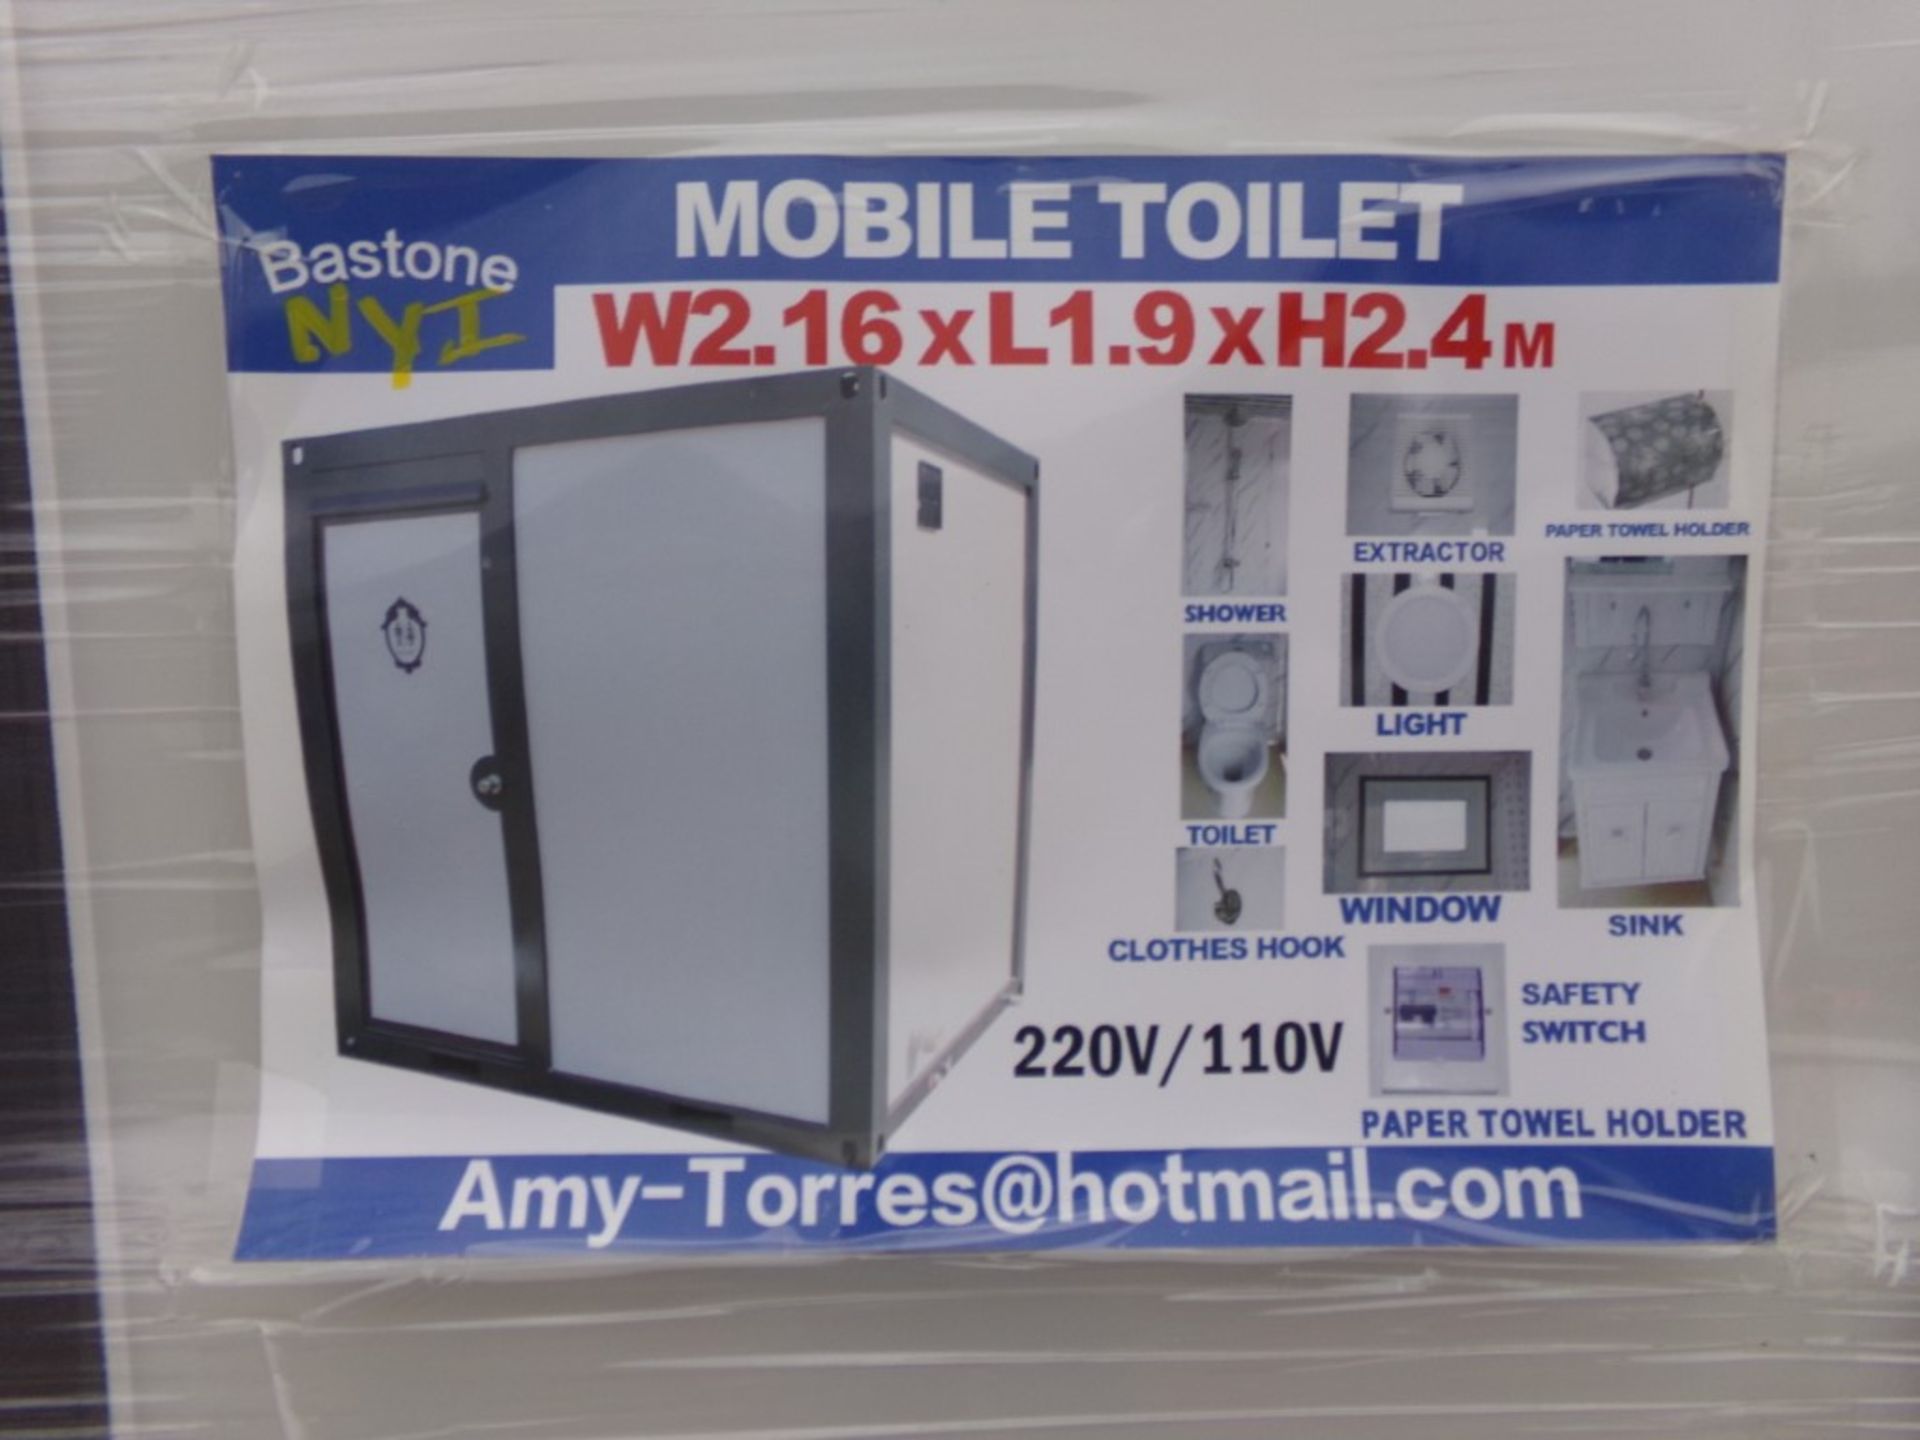 New,Bastone, Mobile Toilet, Complete Bathroom w/Shower, Vent Fan, Toilet, Sink, Requires Electric - Image 2 of 2